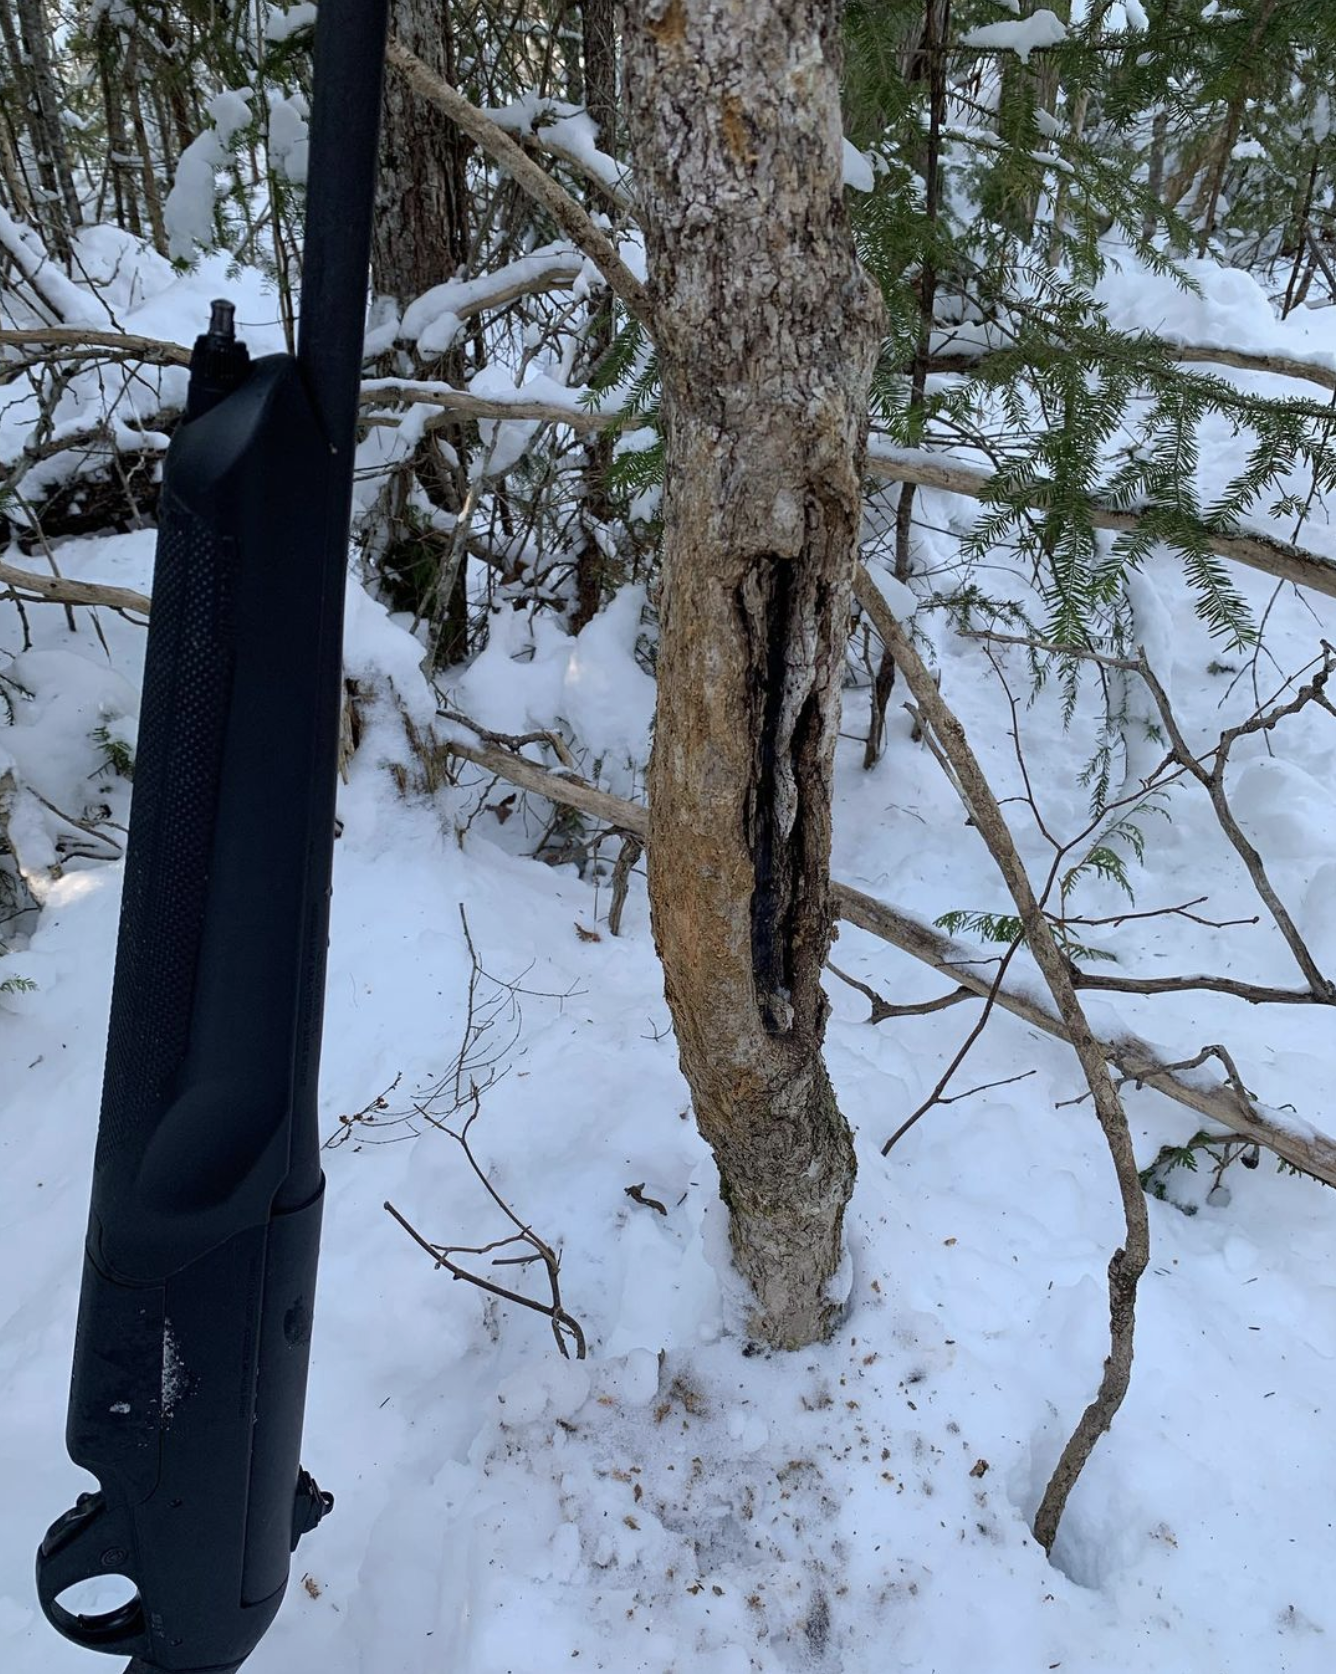 A Signpost Rub That A Buck Brought Me to While Tracking Him In Snow